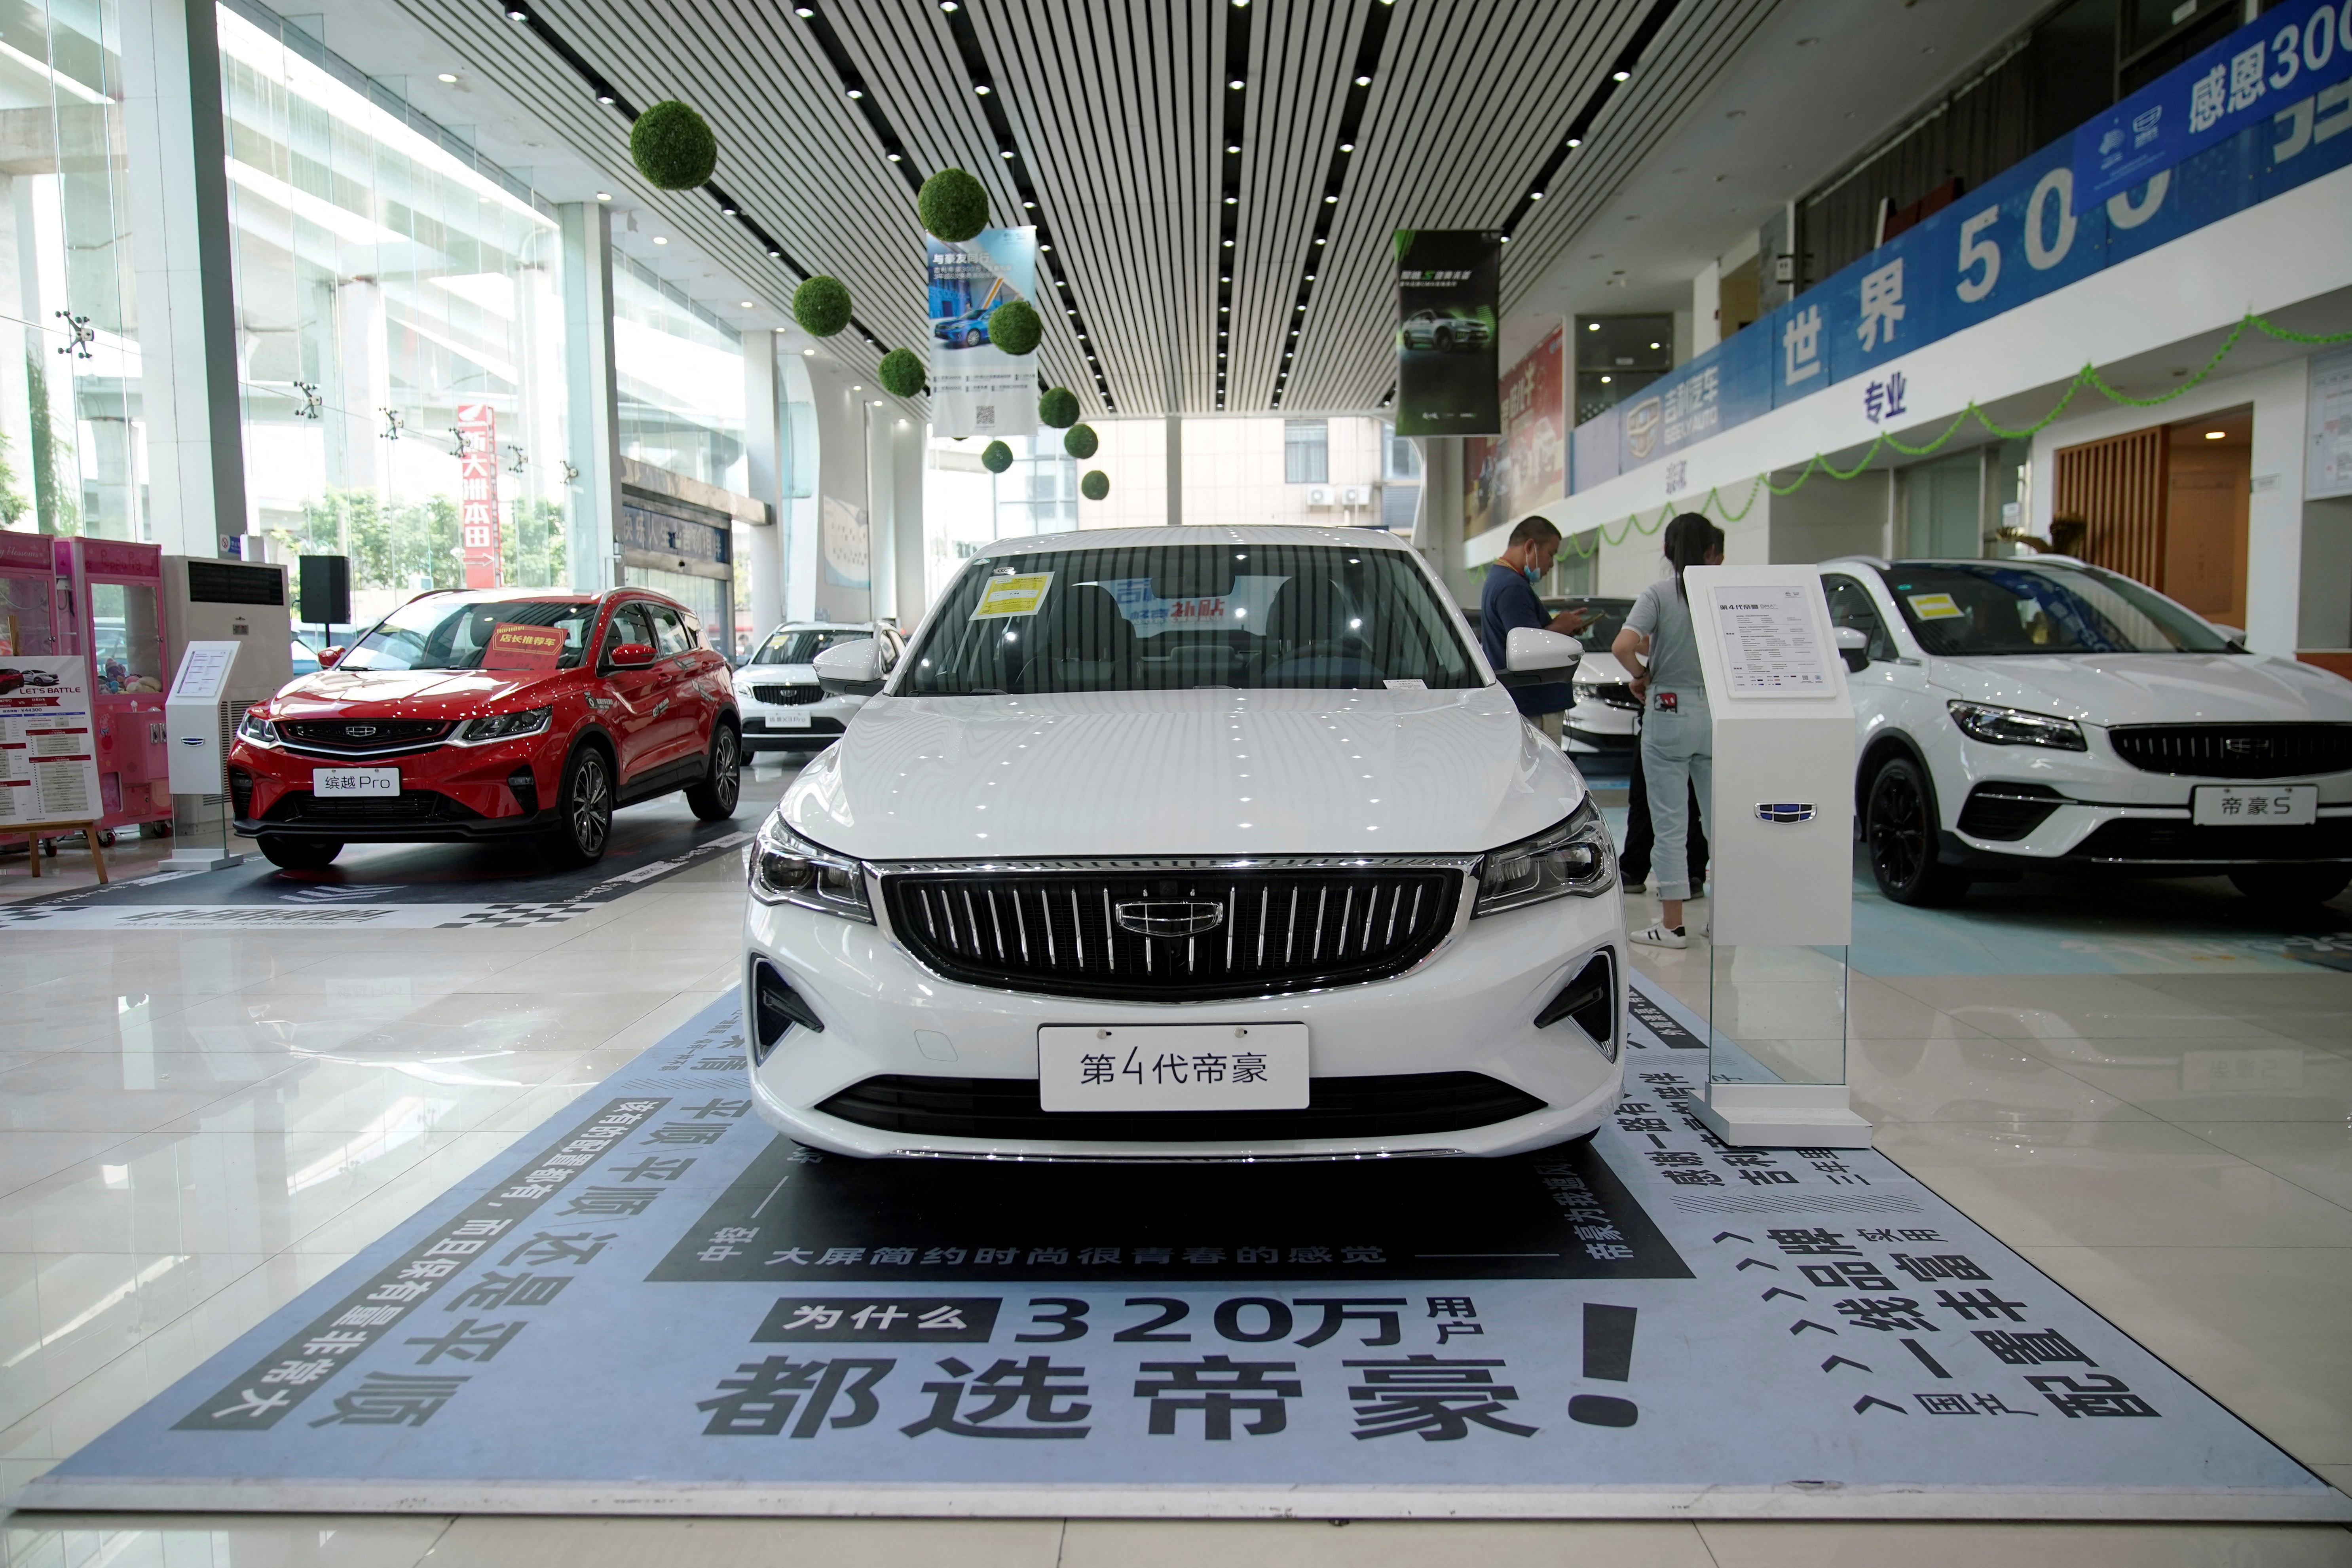 Geely vehicles are displayed at a car dealership in Shanghai